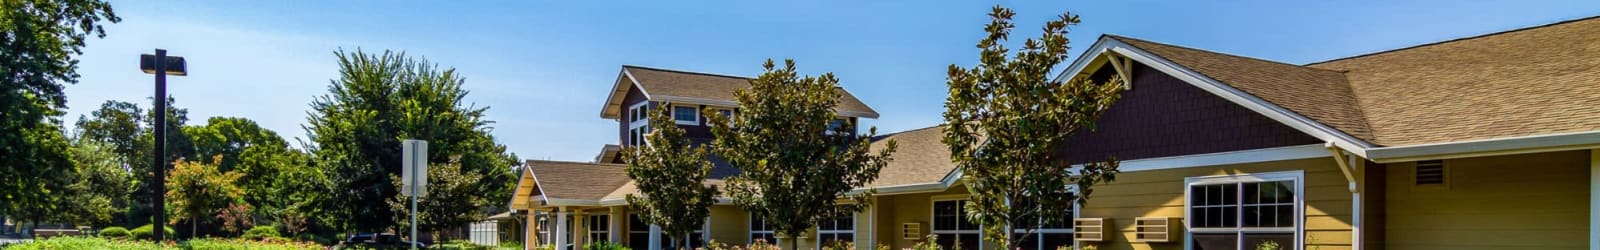 Careers at Amber Grove Place in Chico, California. 